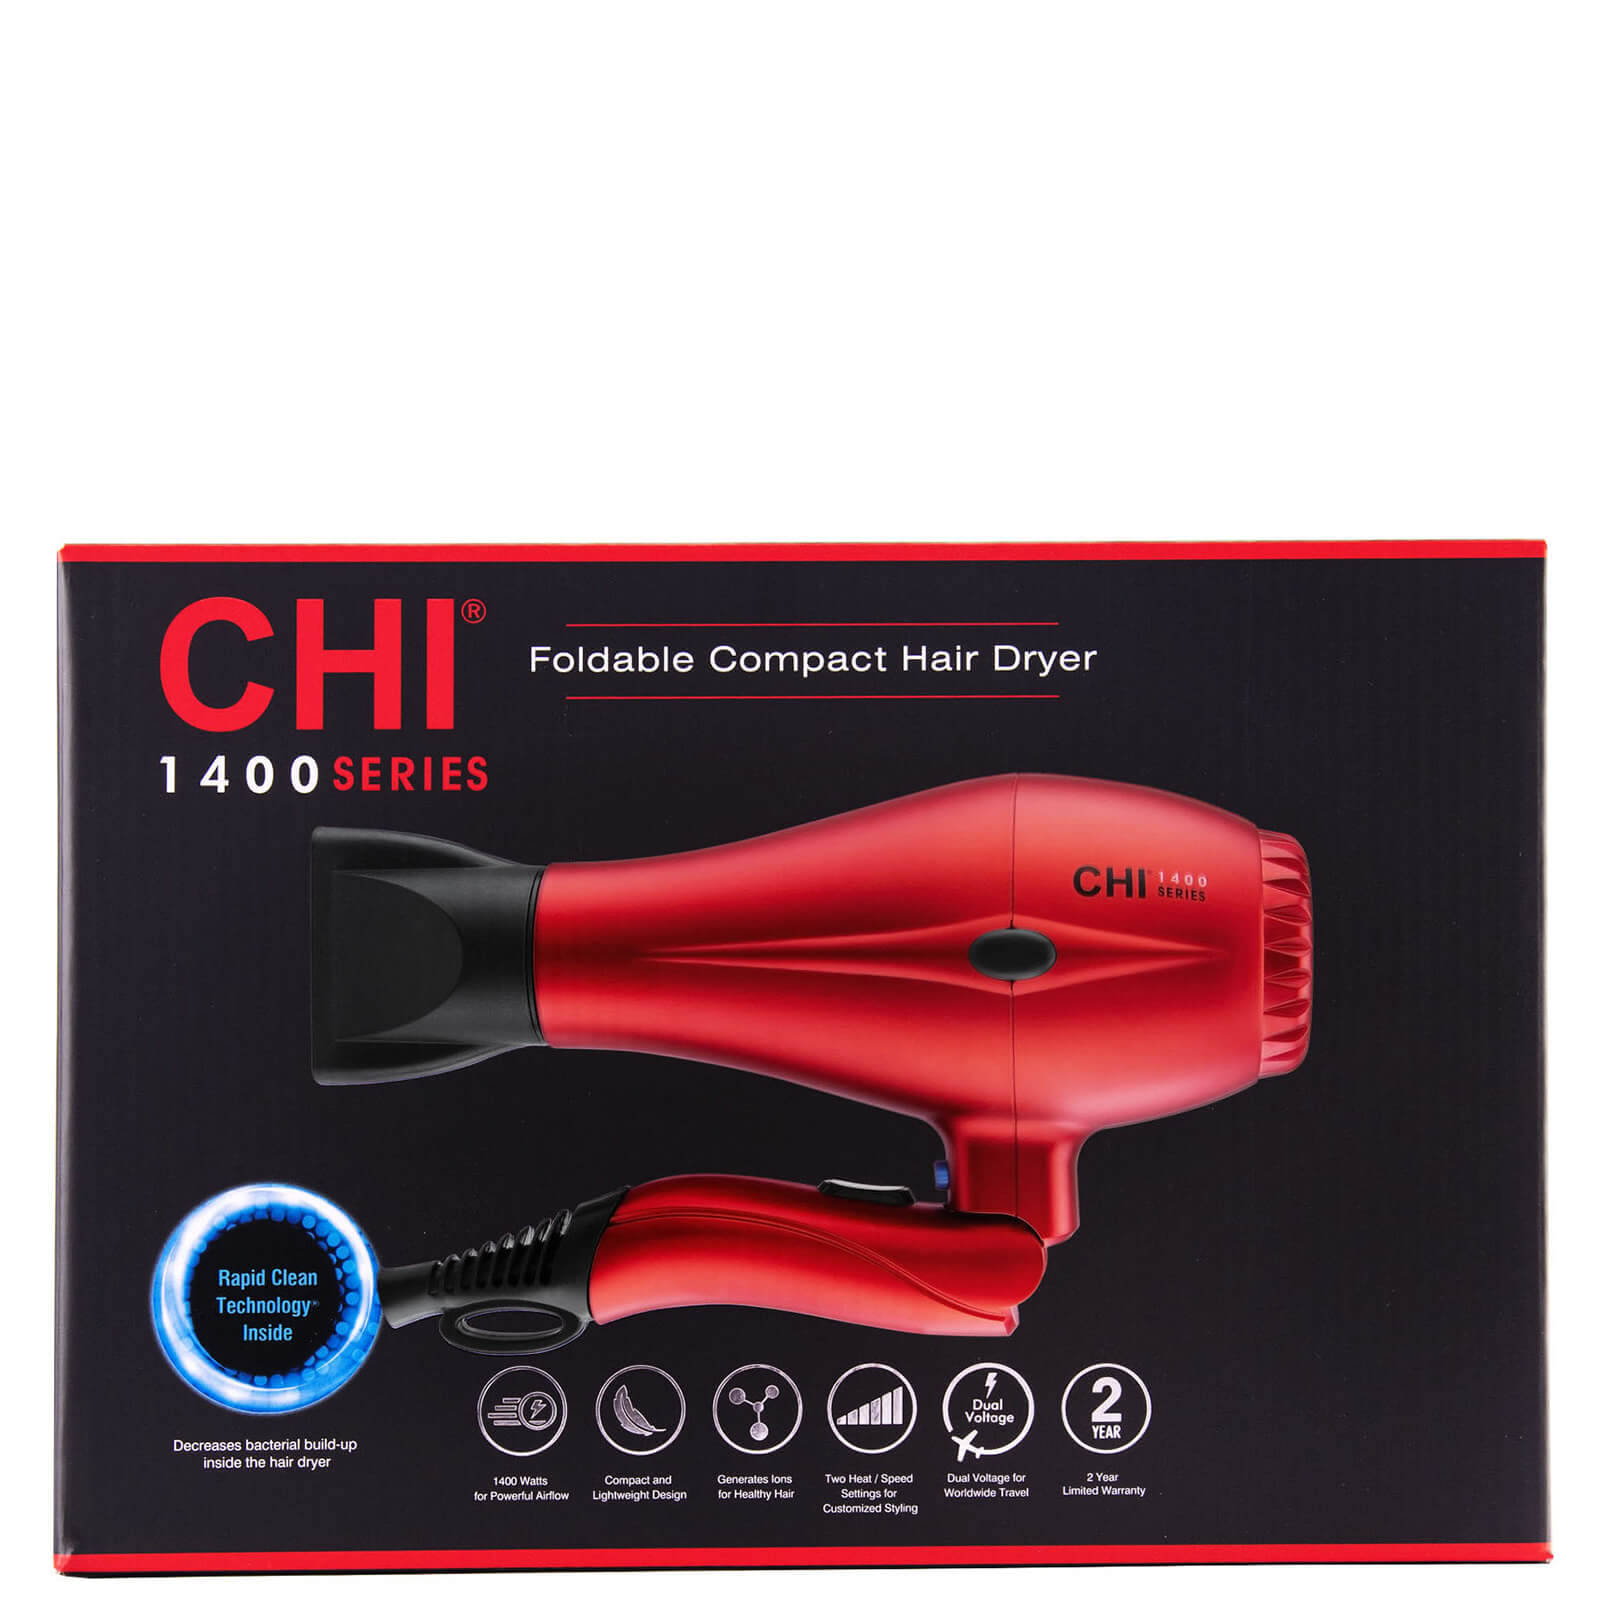 CHI 1400 SERIES FOLDABLE COMPACT HAIR DRYER,CA7550